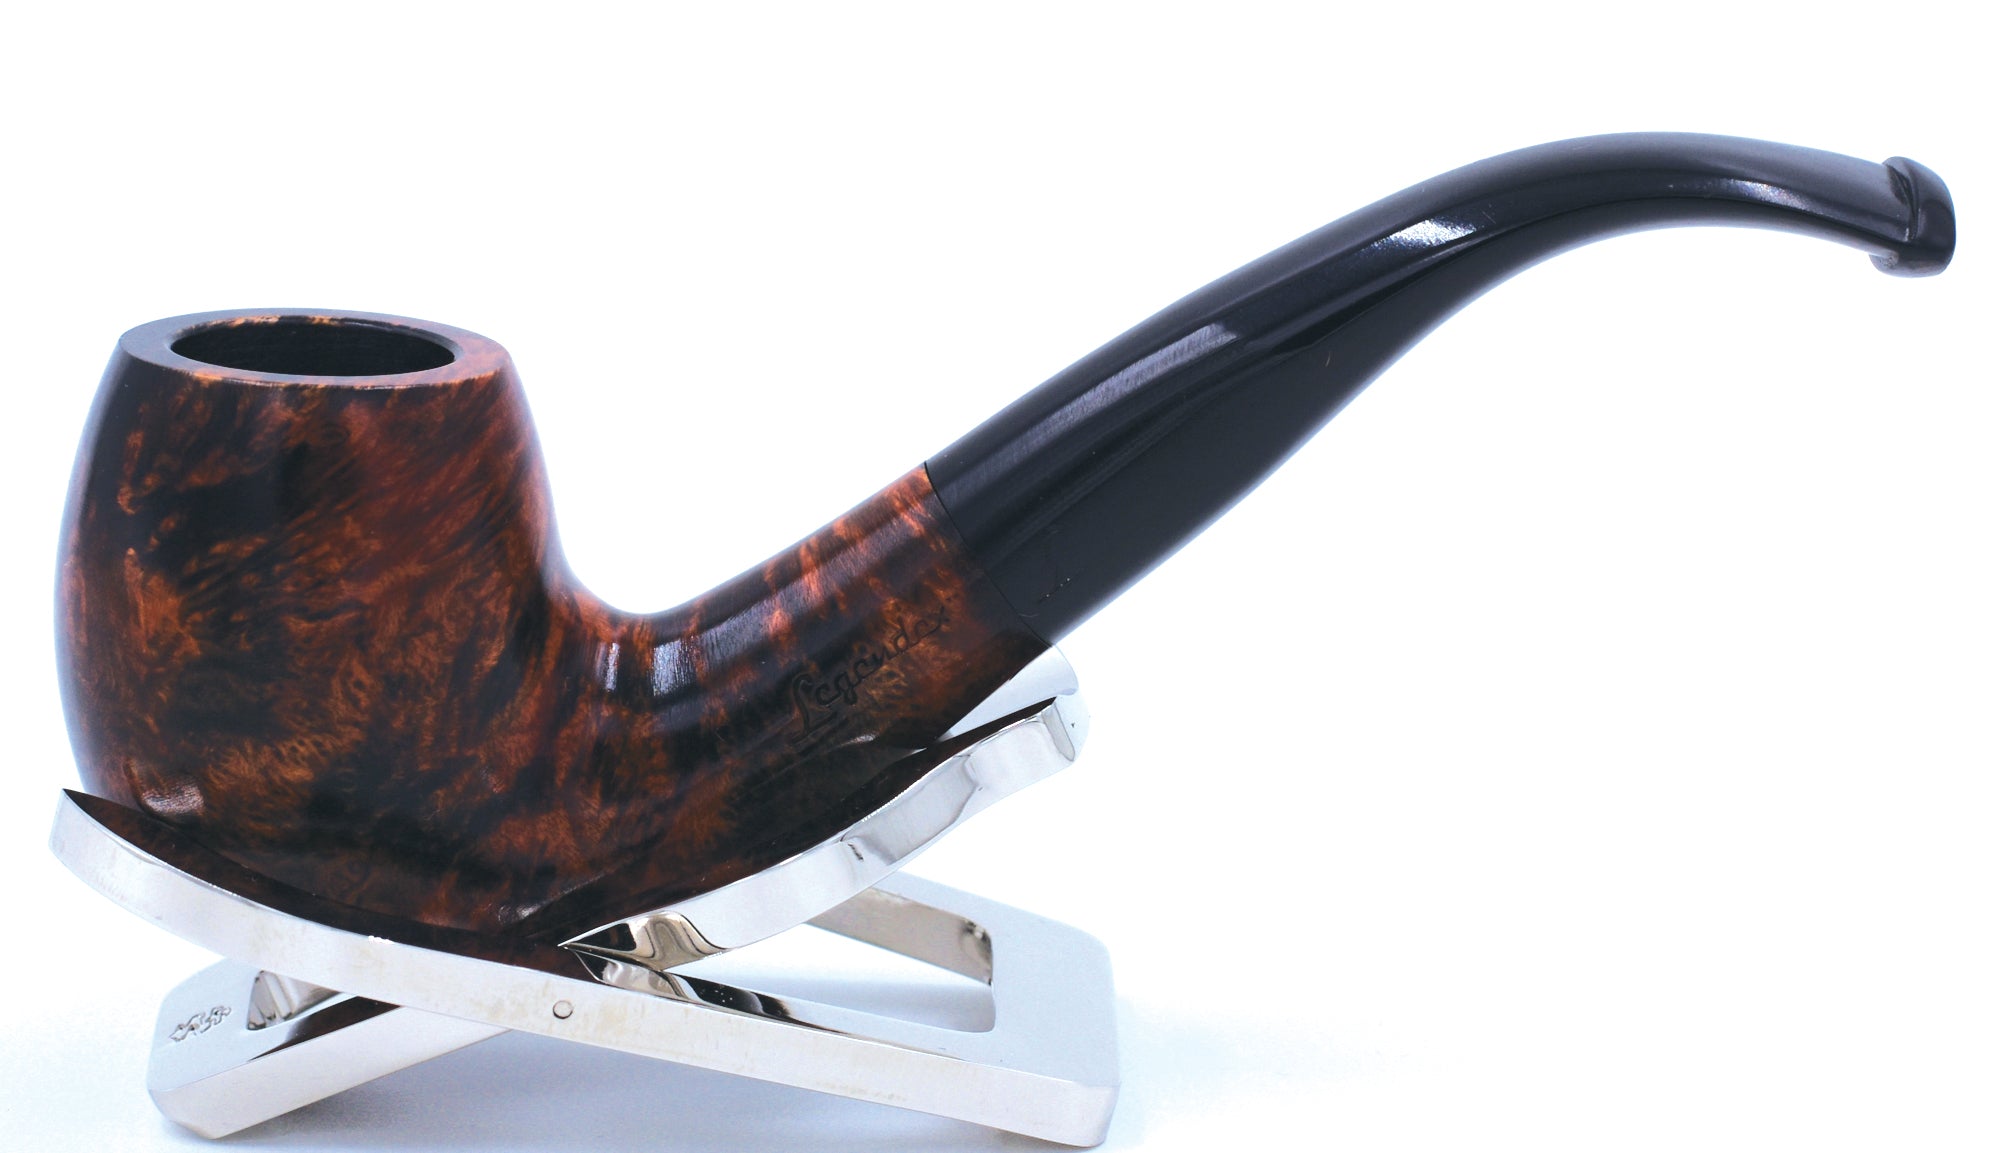 LEGENDEX® PAGANINI* 9 MM Filtered Briar Smoking Pipe Made In Italy 01-08-320